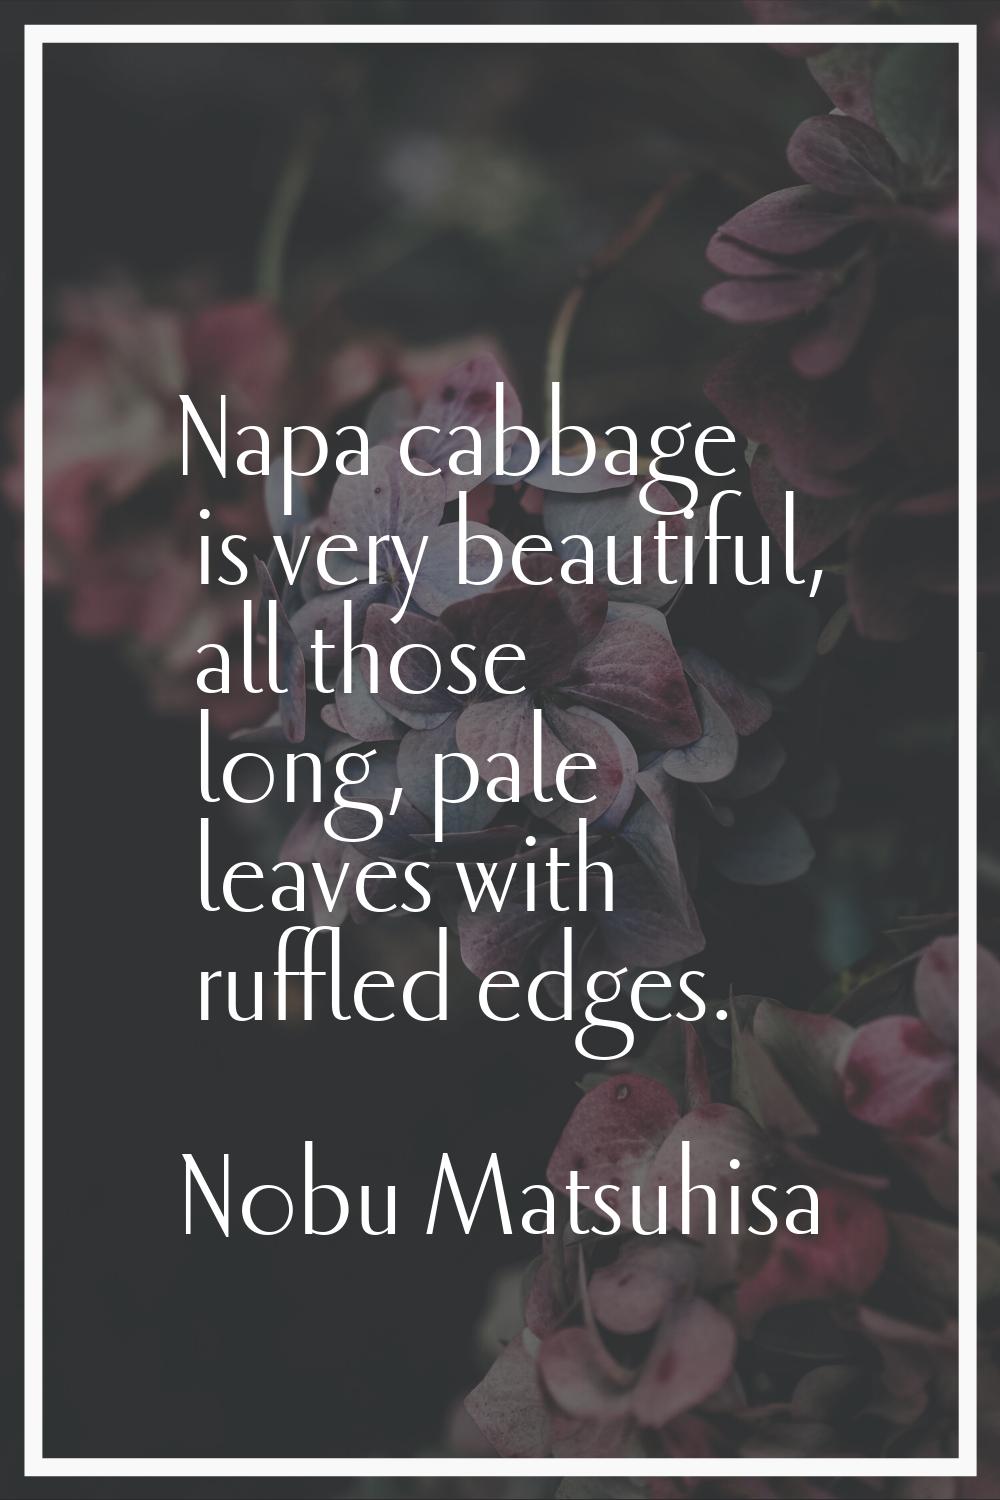 Napa cabbage is very beautiful, all those long, pale leaves with ruffled edges.